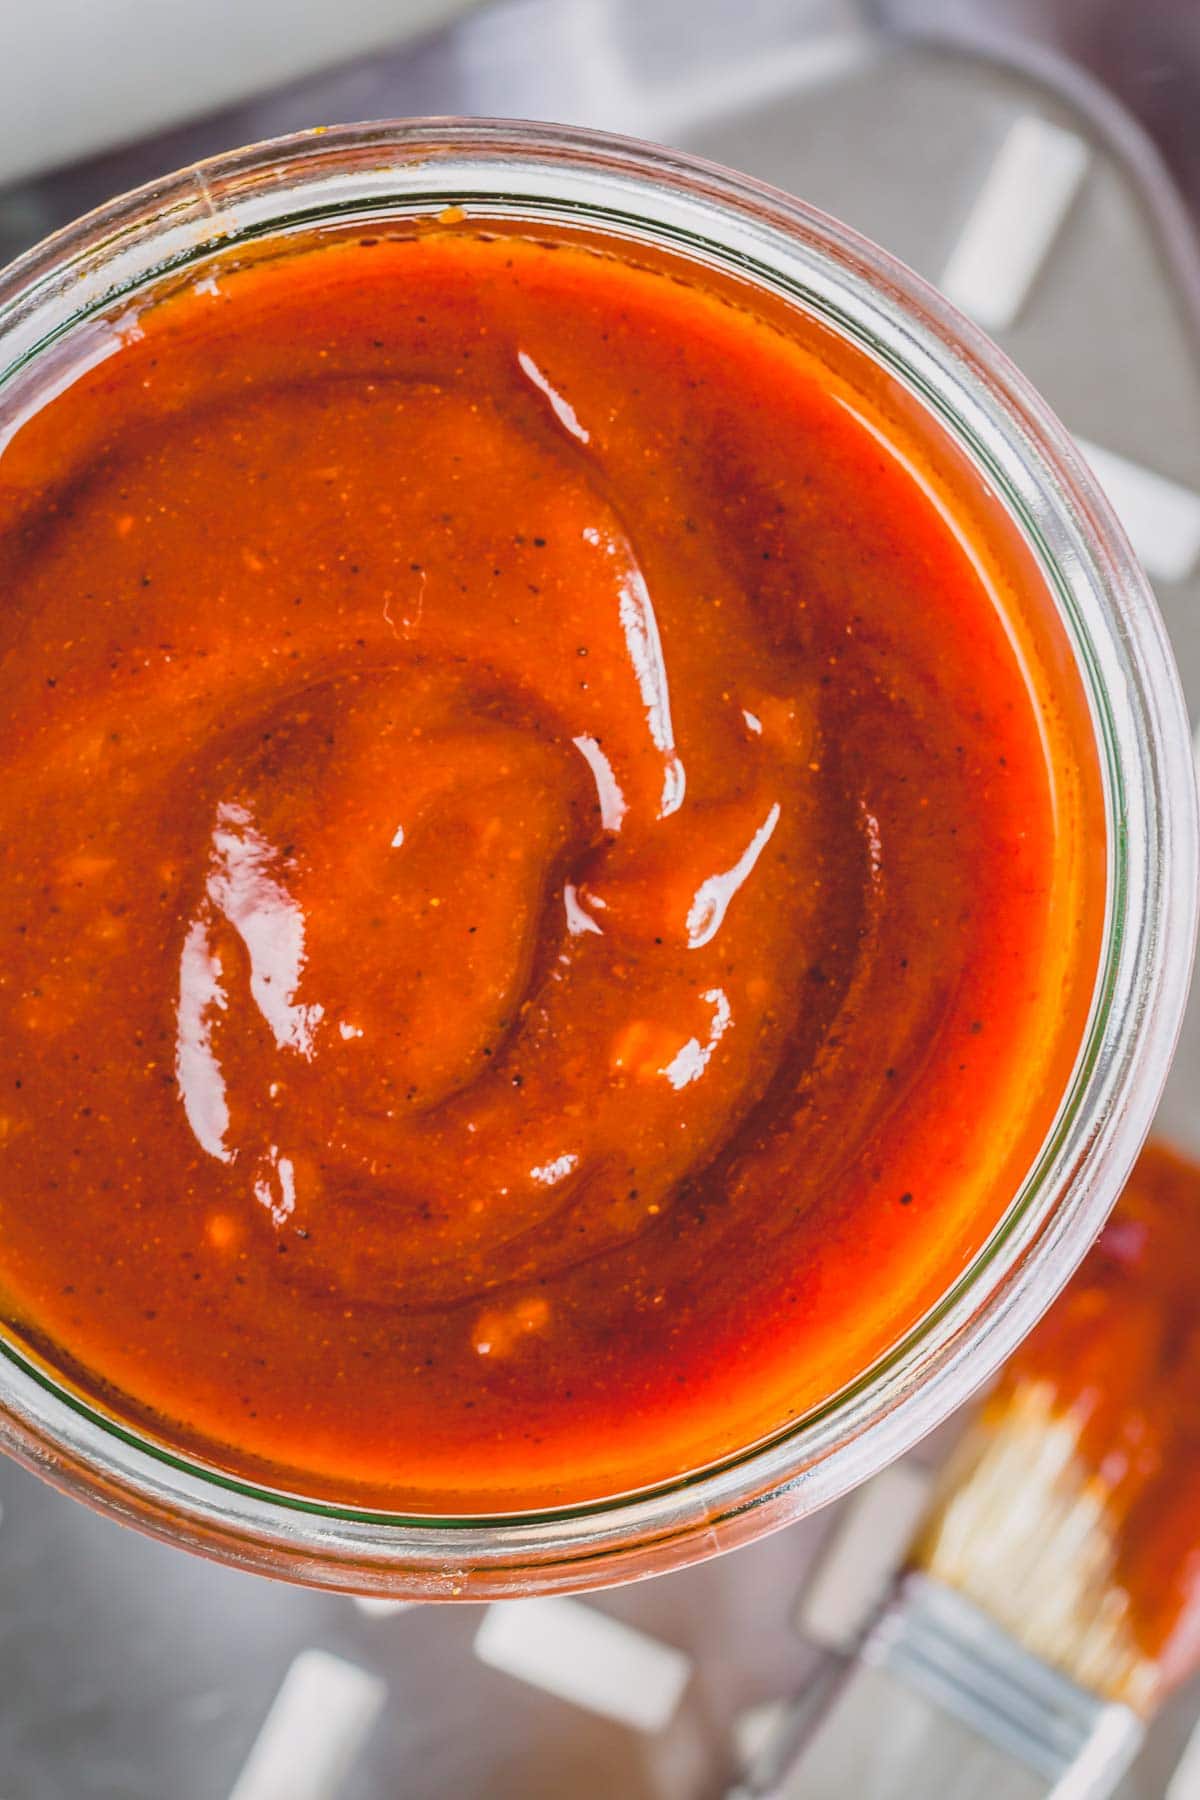 A close-up shot of jar of bbq sauce from the top.